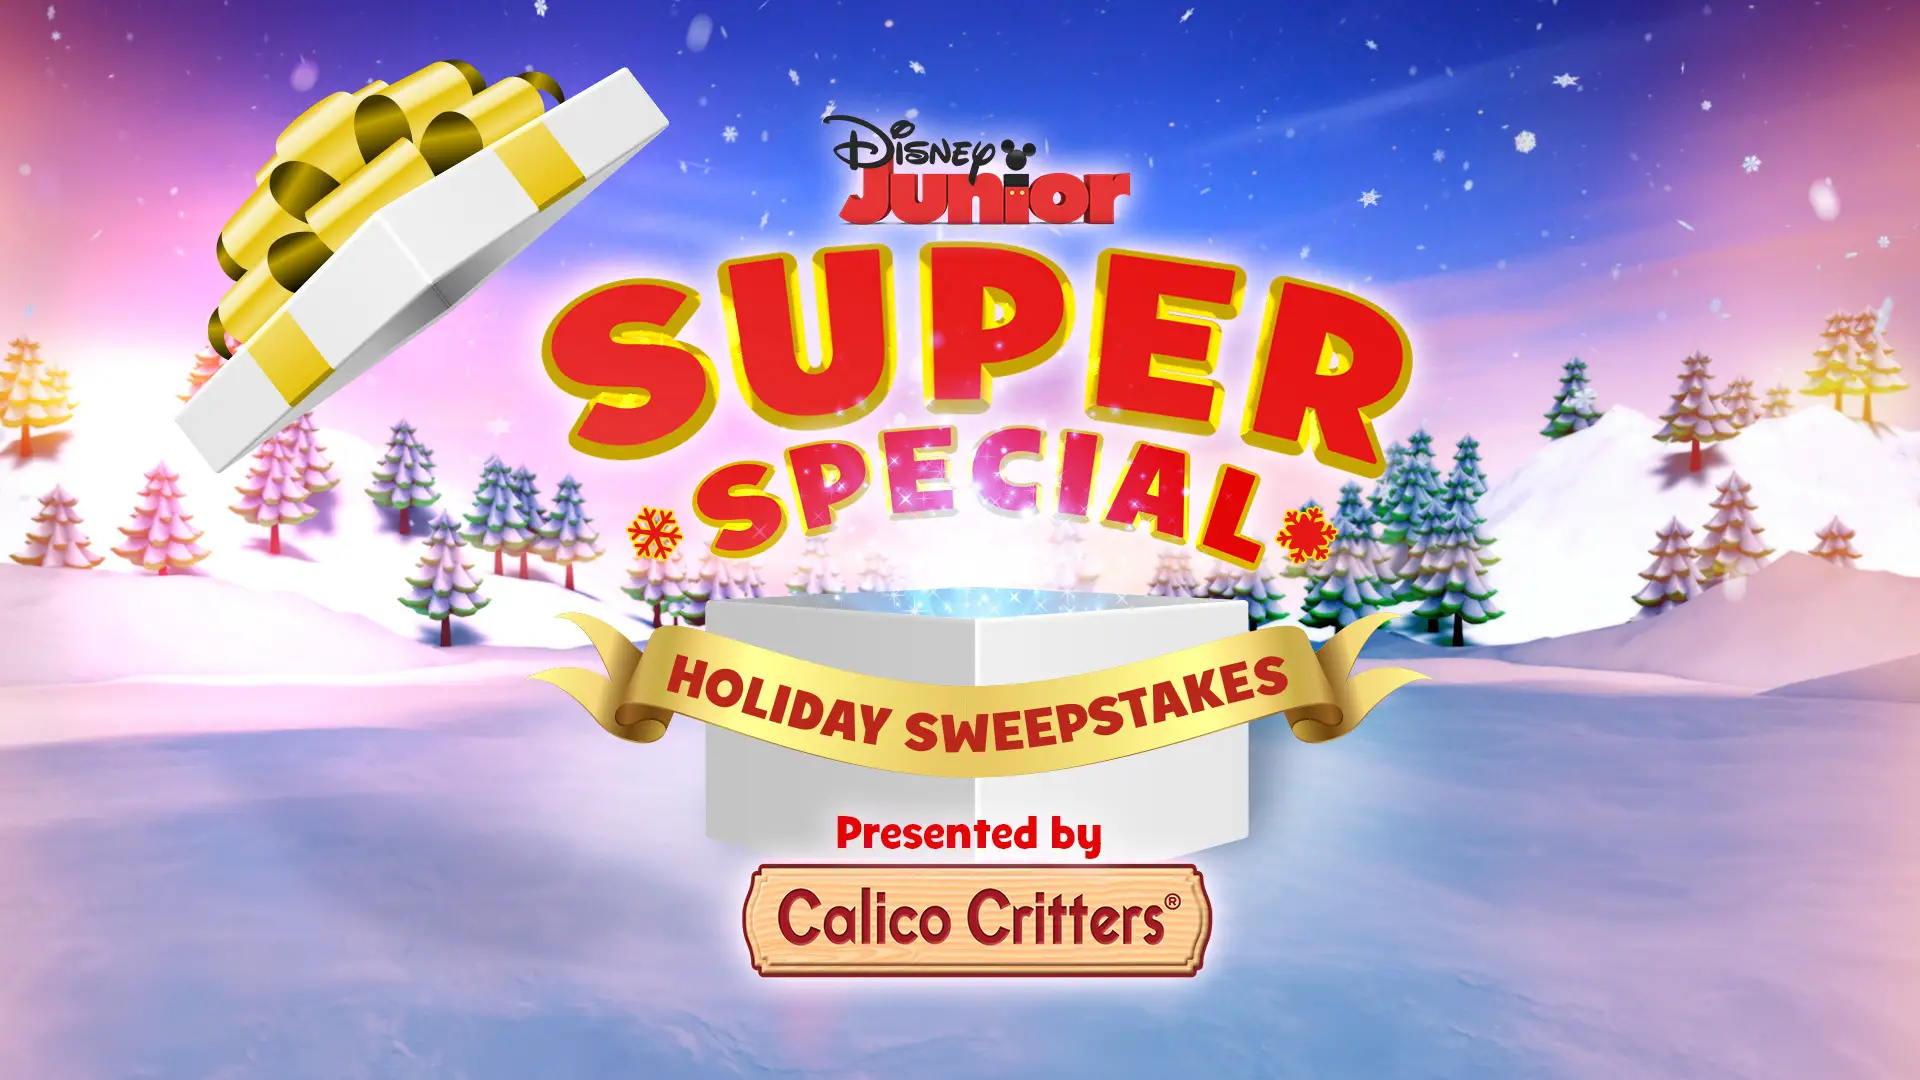 Enter Disney Junior's Super Special Holiday Sweepstakes for your chance to win Calico Critters toys and accessories.